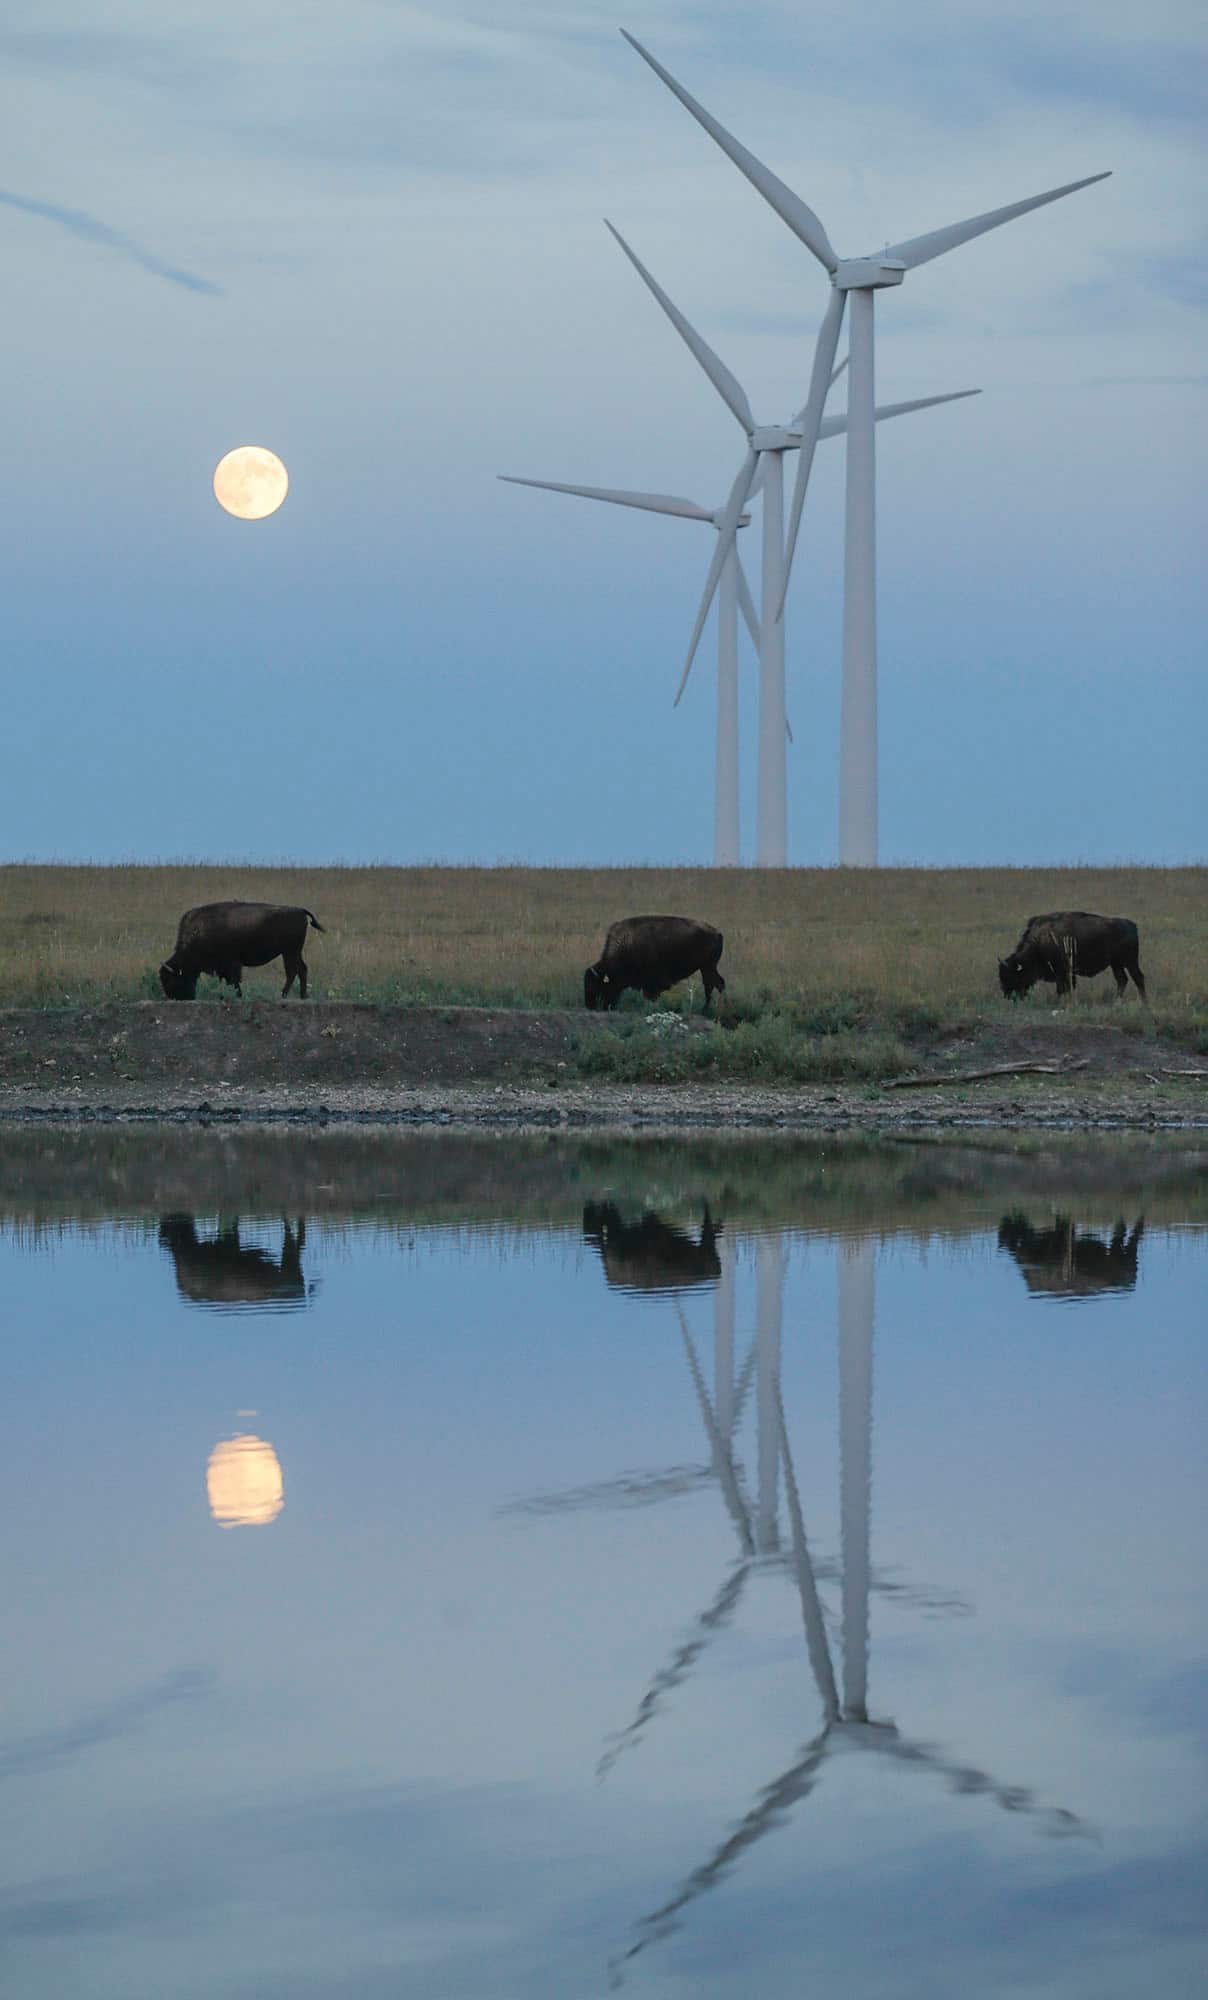 As the moon rises, bison graze in a pasture beneath a row of wind turbines near Beaumont, Kan.